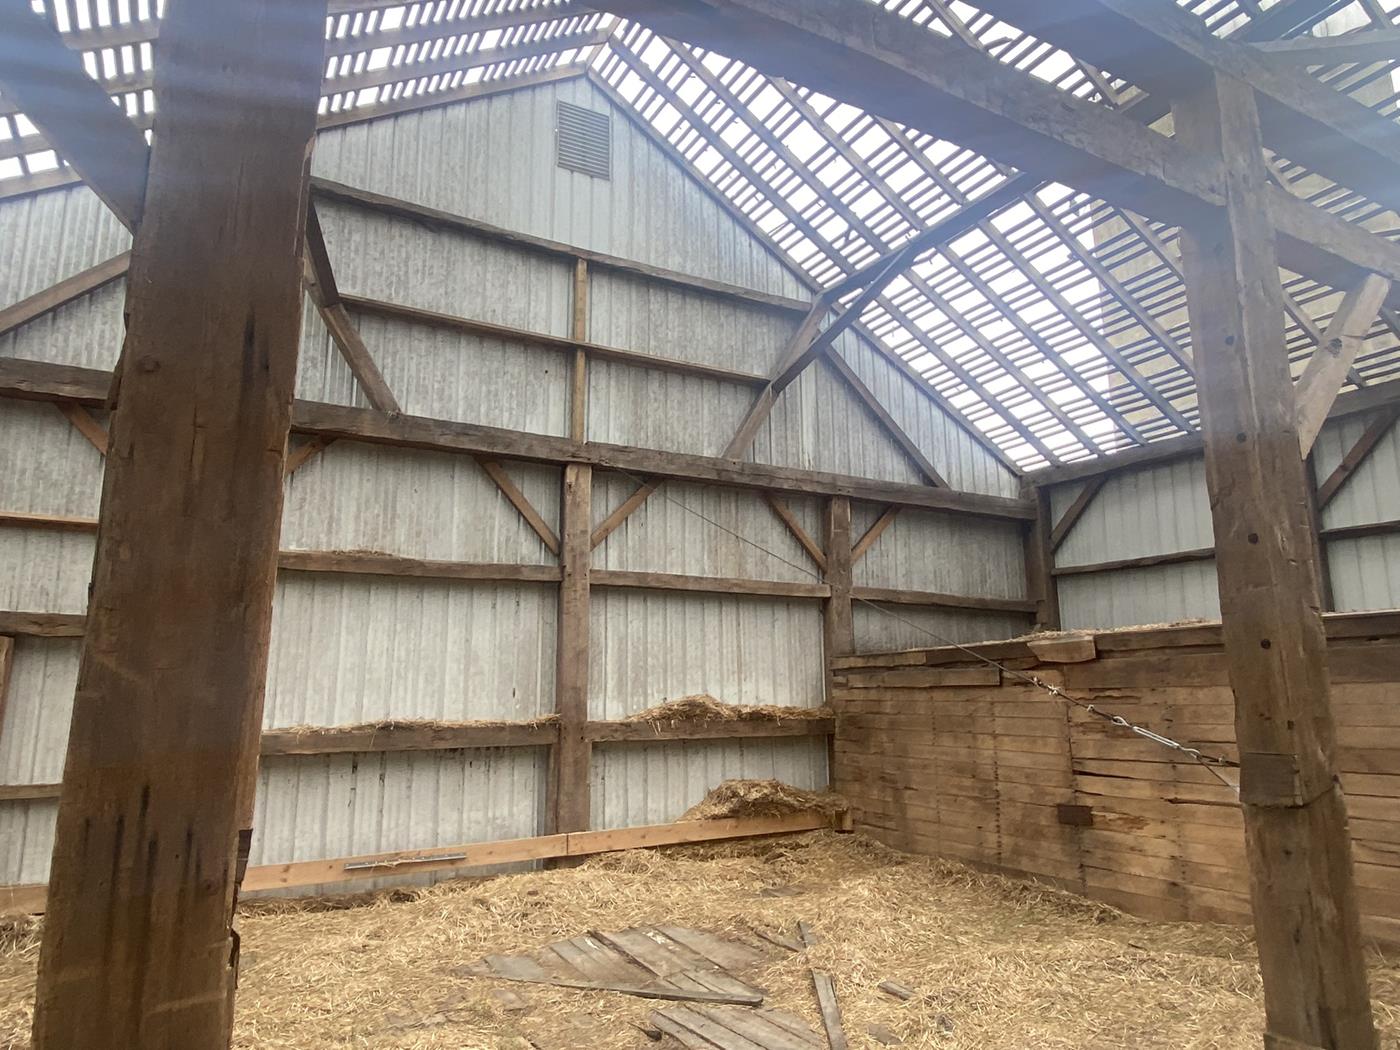 https://www.ohiovalleybarnsalvage.com/images/Mast Barn Frame Ohio Valley Salvage - Your Source For Tree Trunk Slices